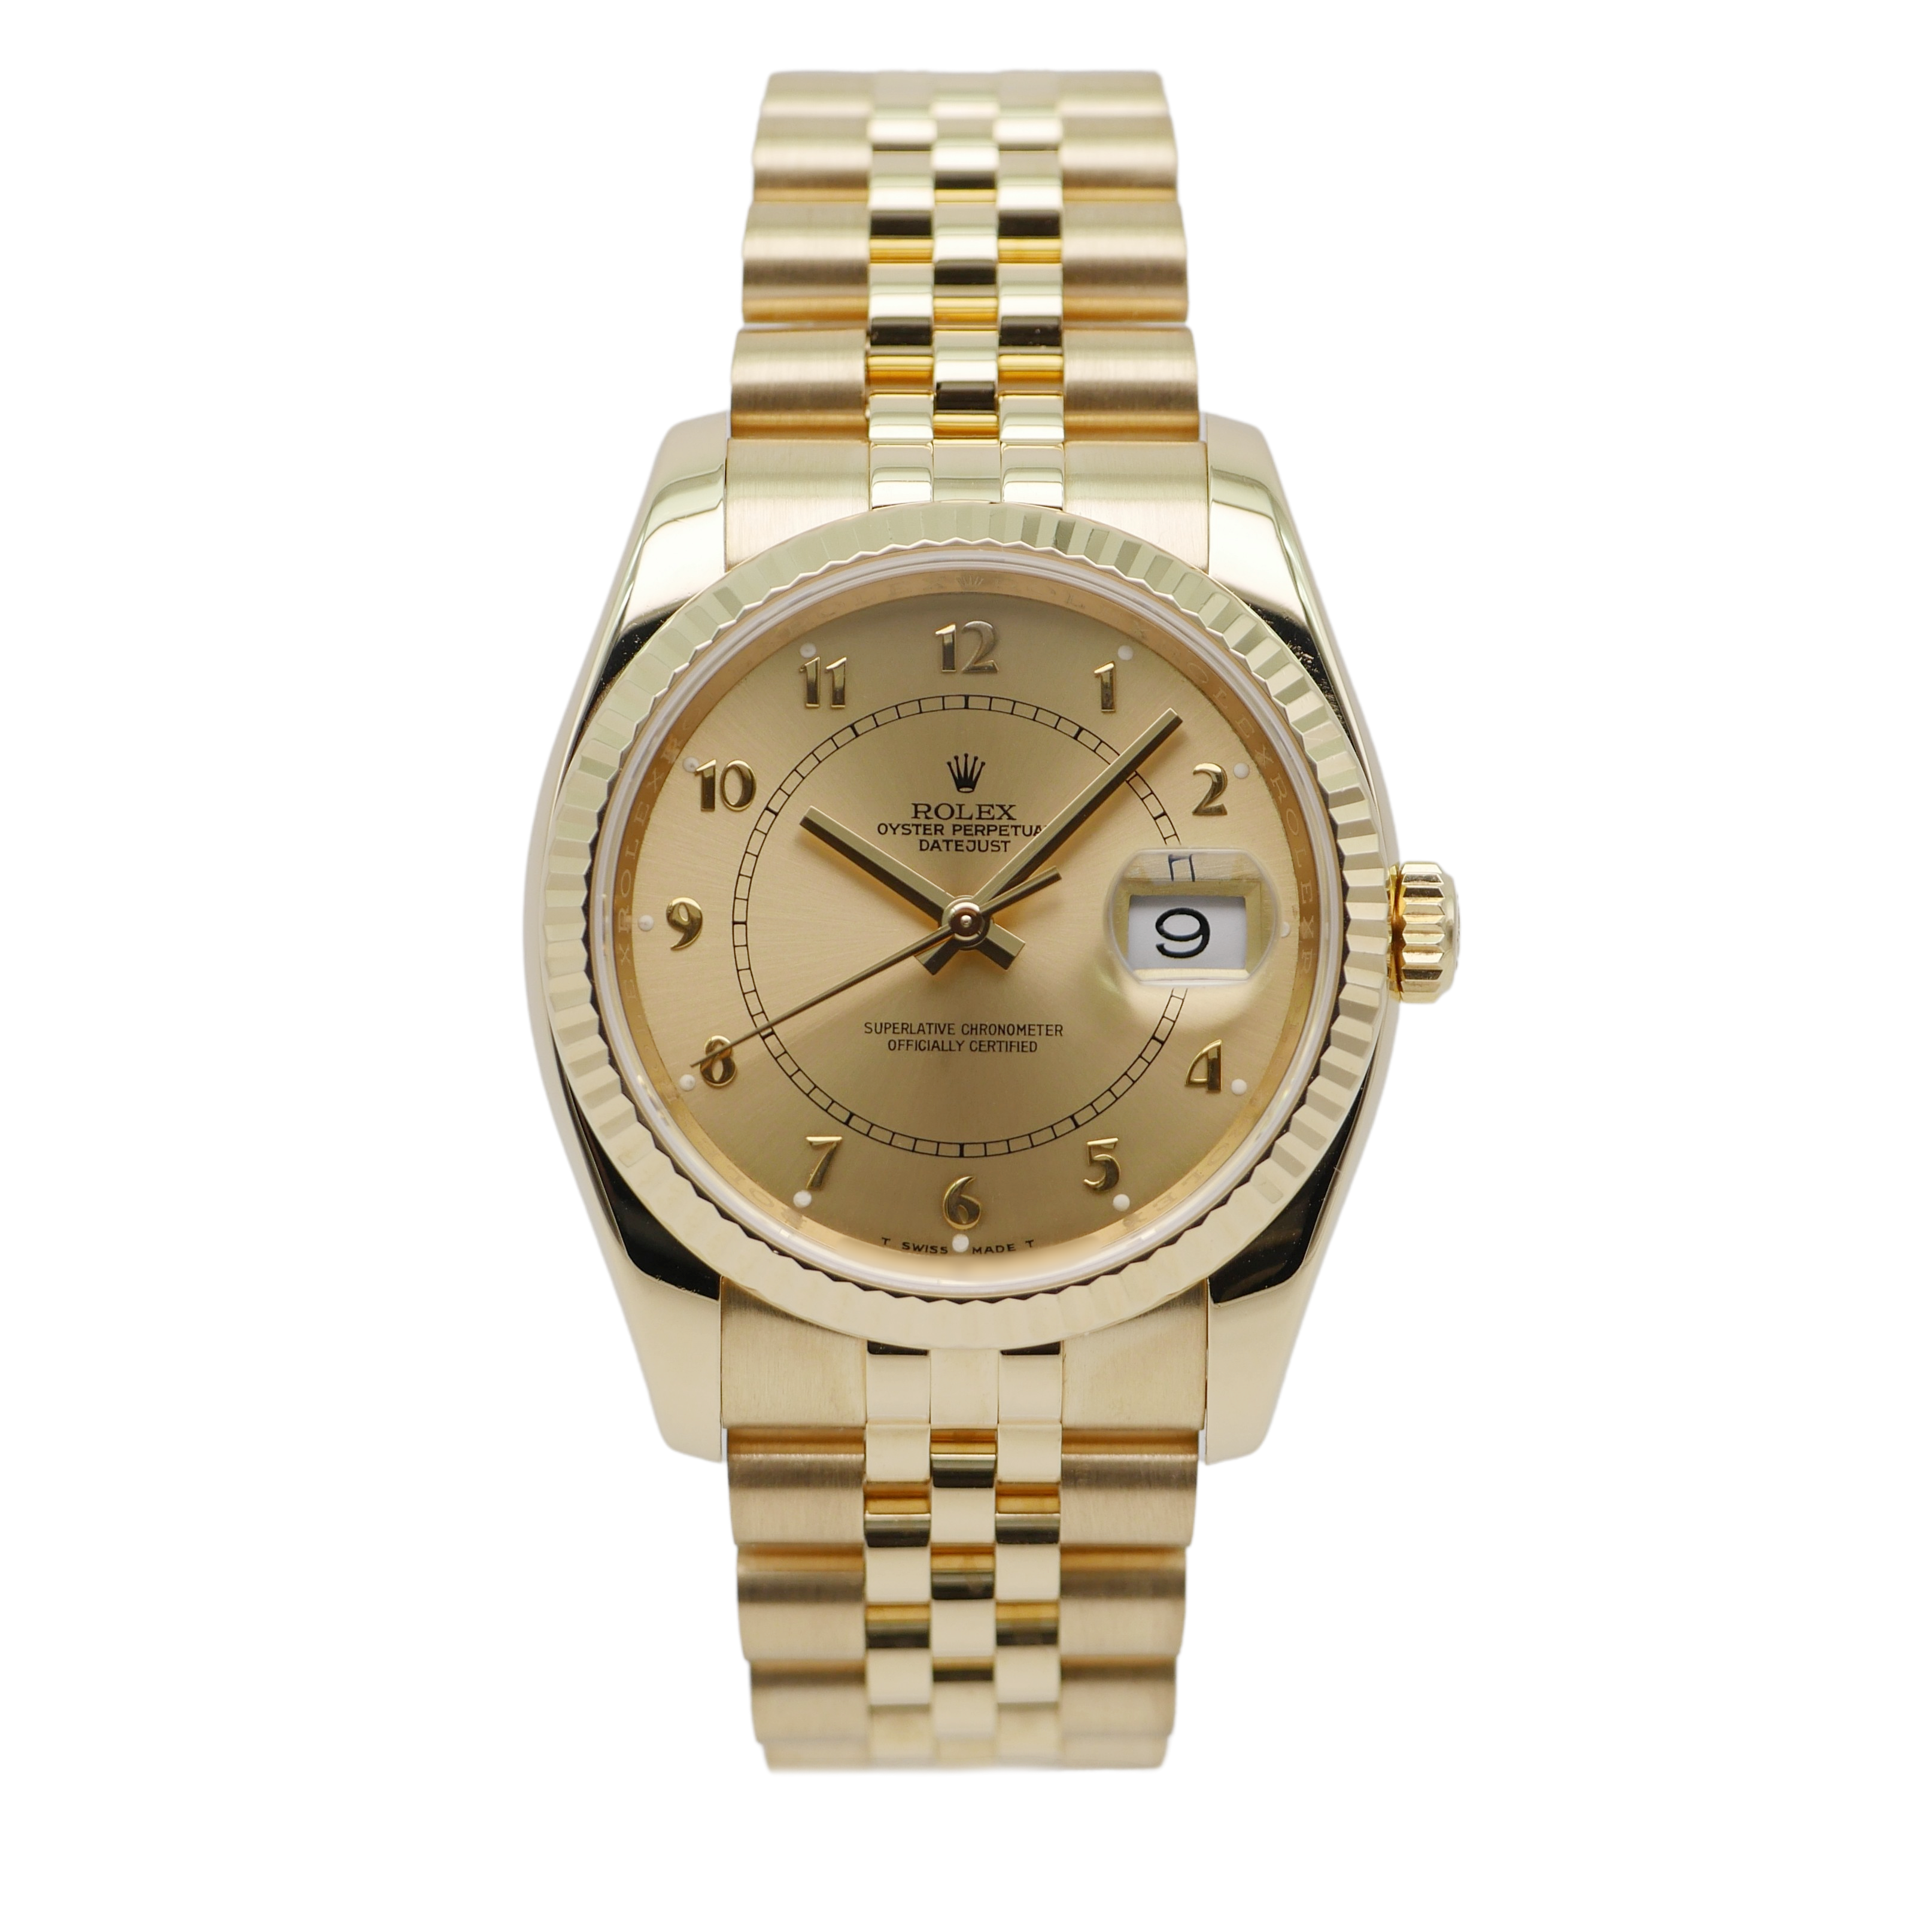 Rolex Datejust 36 Yellow Gold "Onyx Dial" 116238 - 2009